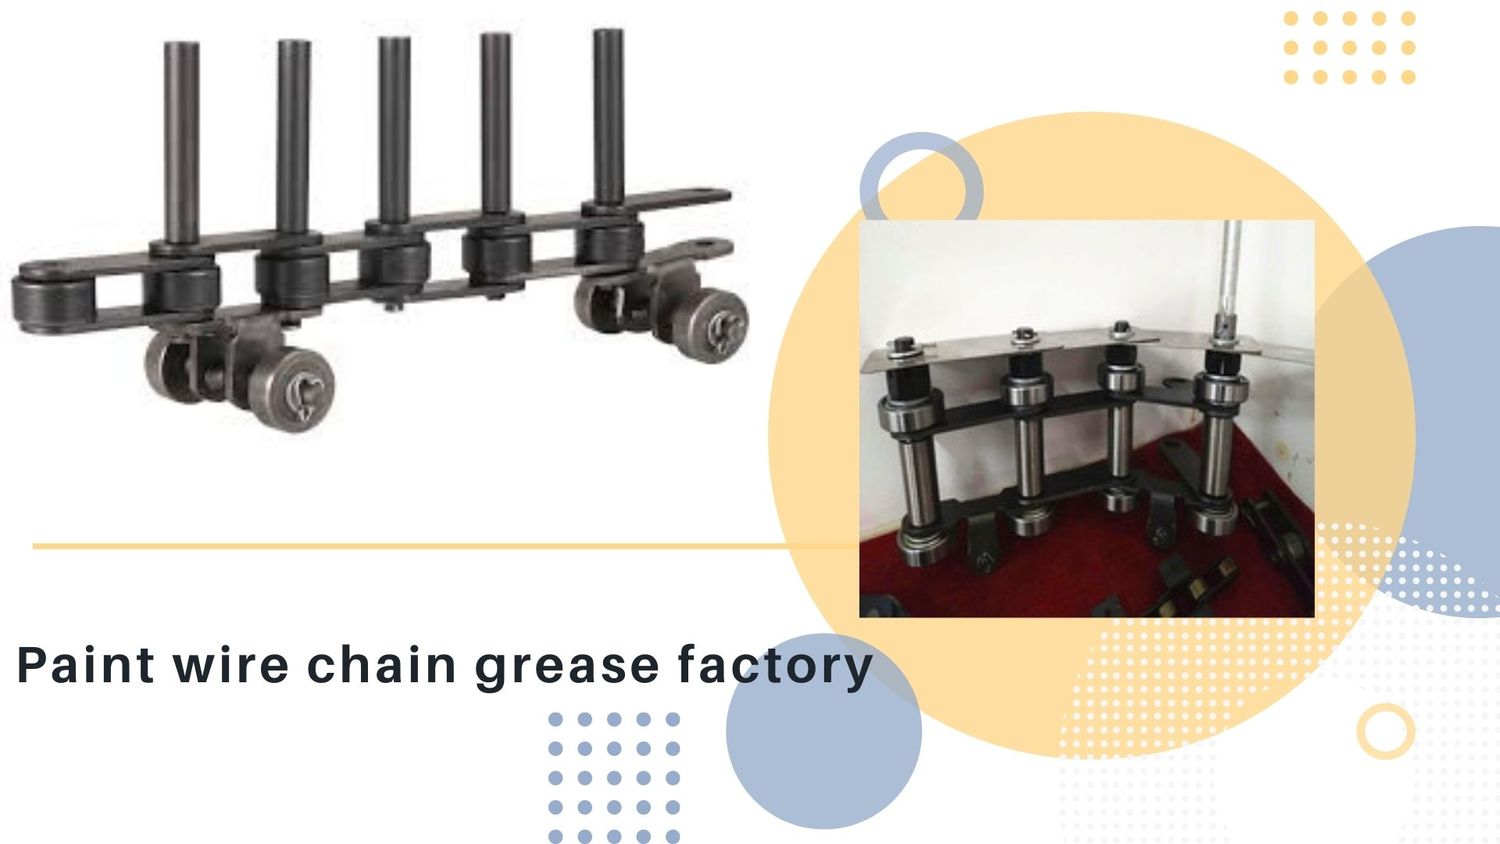 Paint wire chain grease factory.jpg